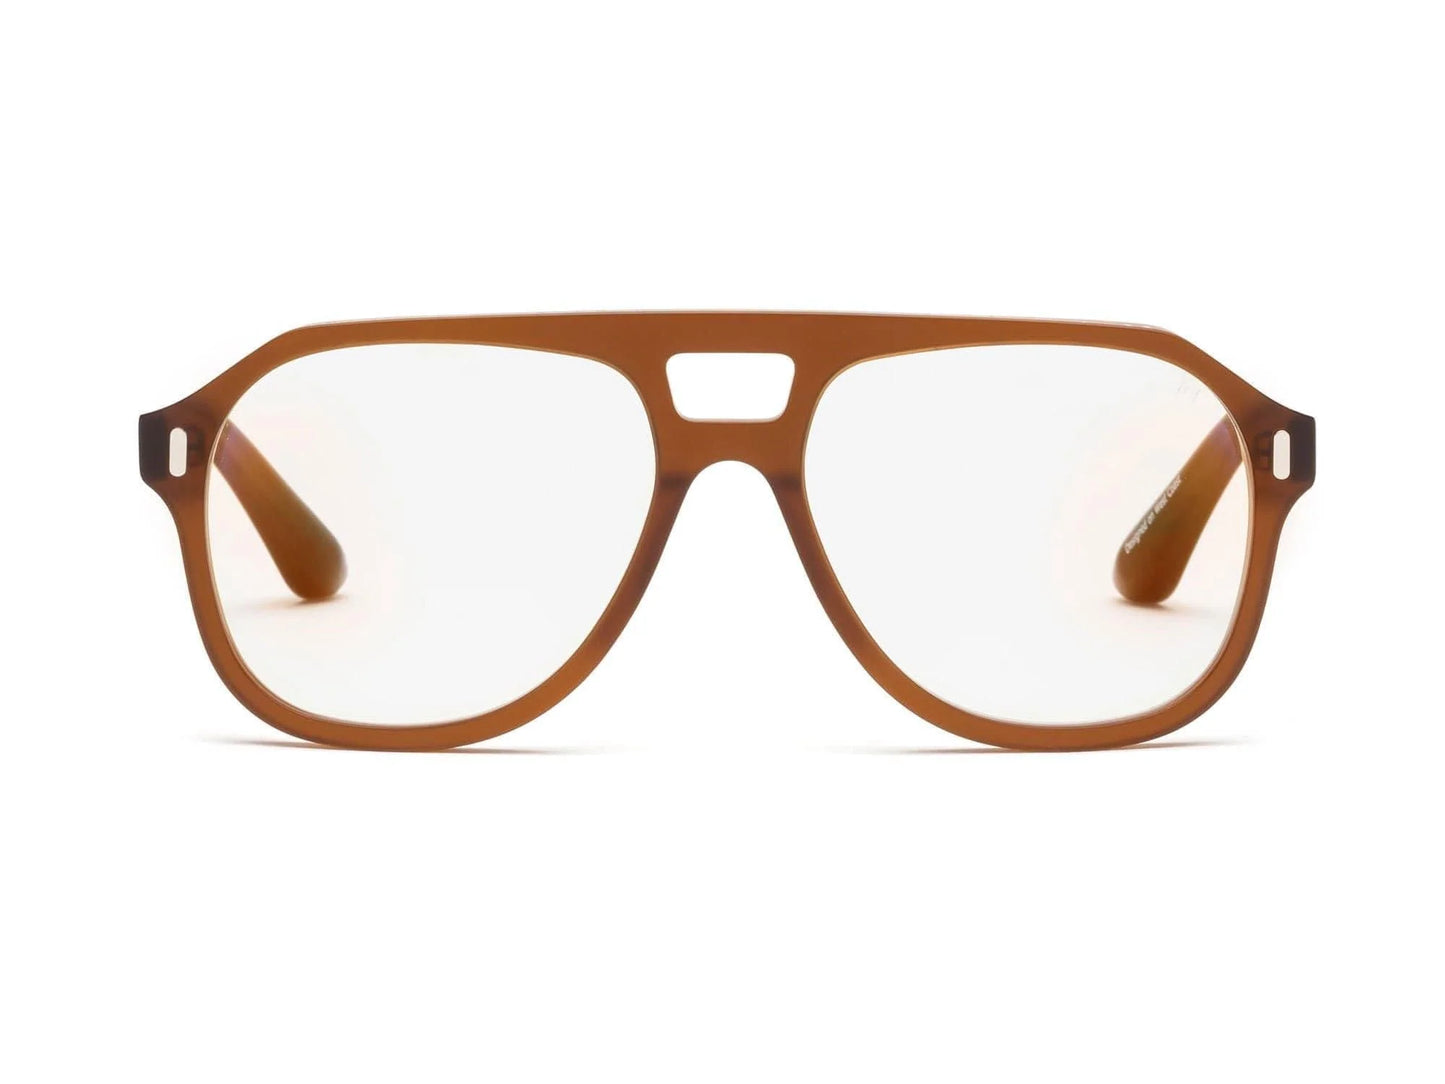 CADDIS Root Cause Analysis Reading Glasses - Gopher